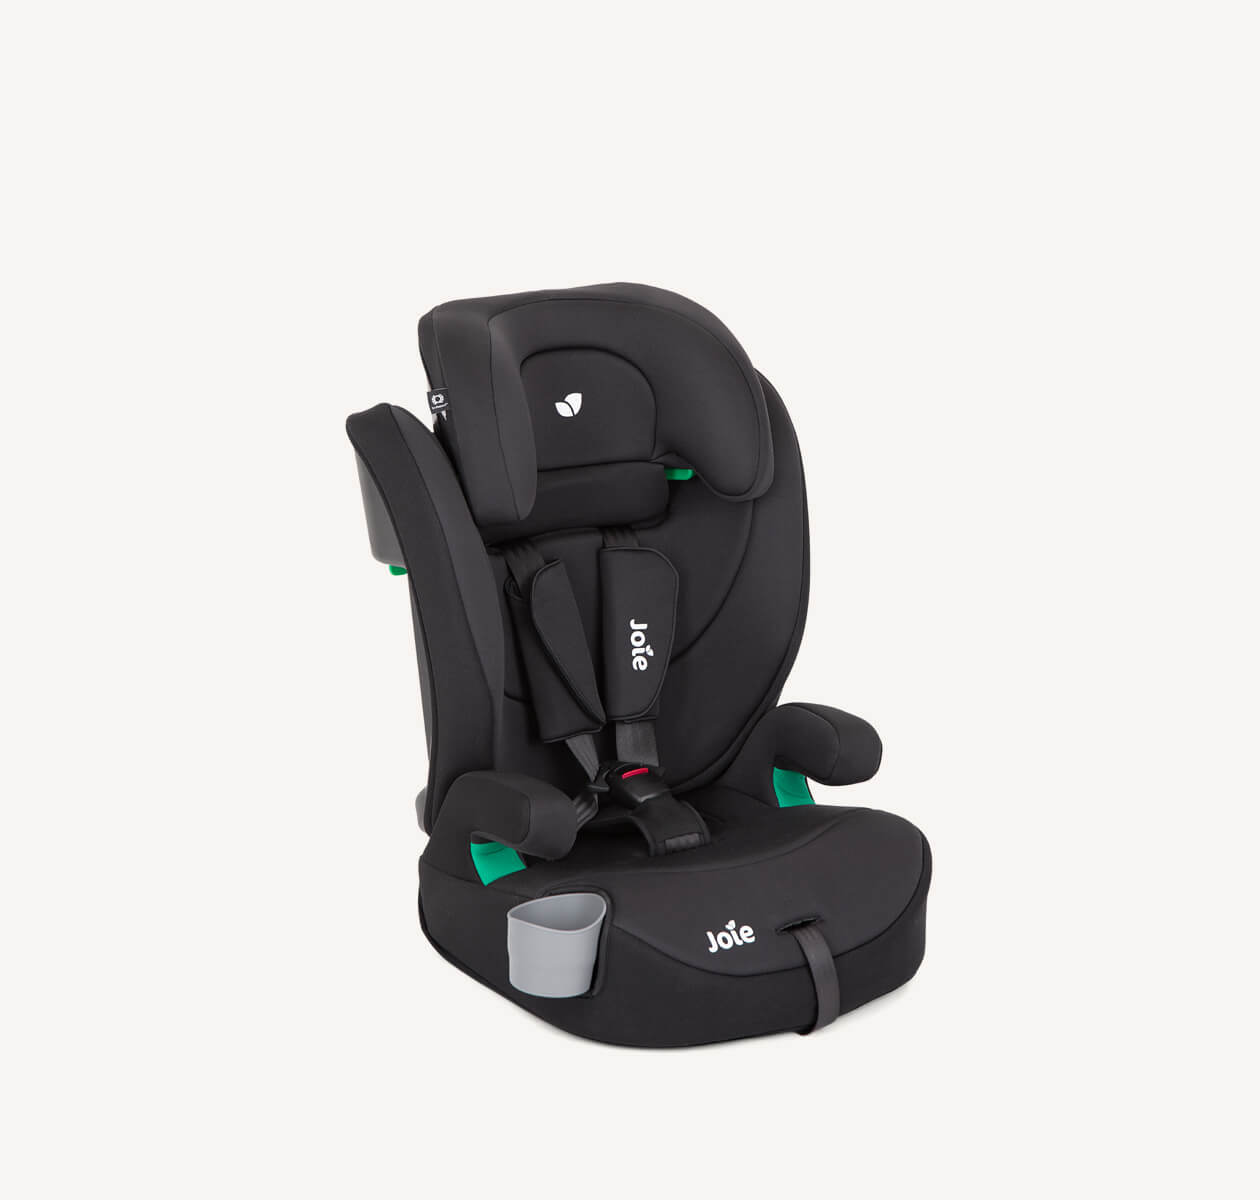 Joie elevate R129 harnessed car seat booster in black at an angle. 